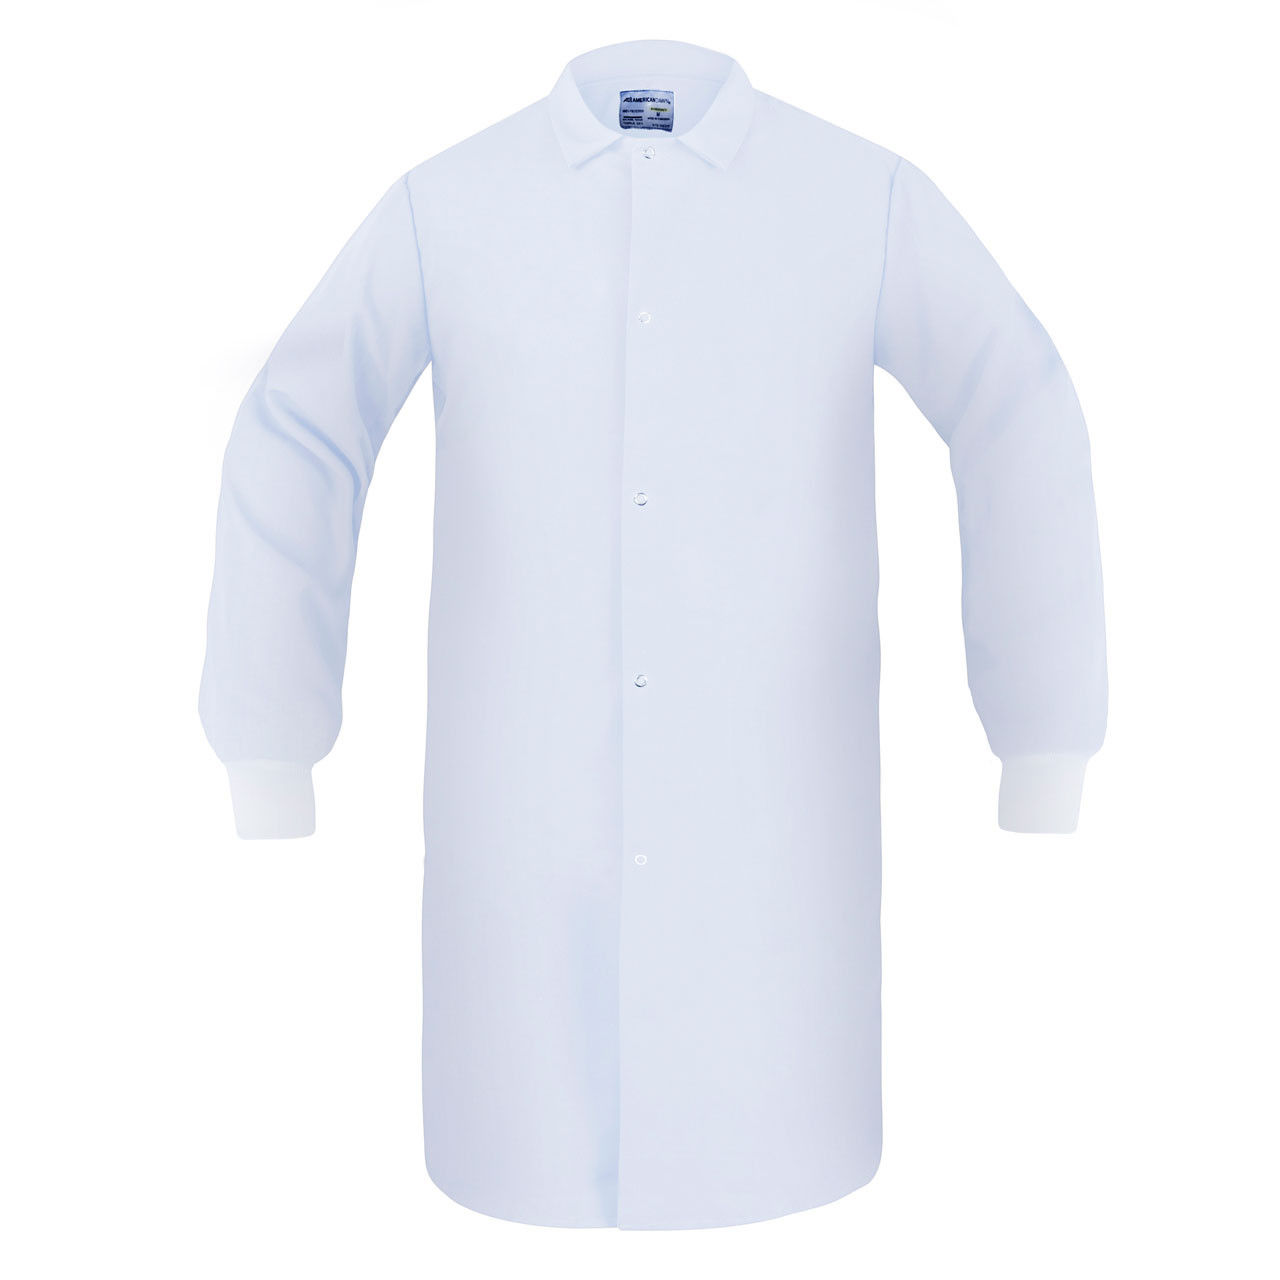 What compliance standards do these HACCP uniforms, specifically the white frock, meet?